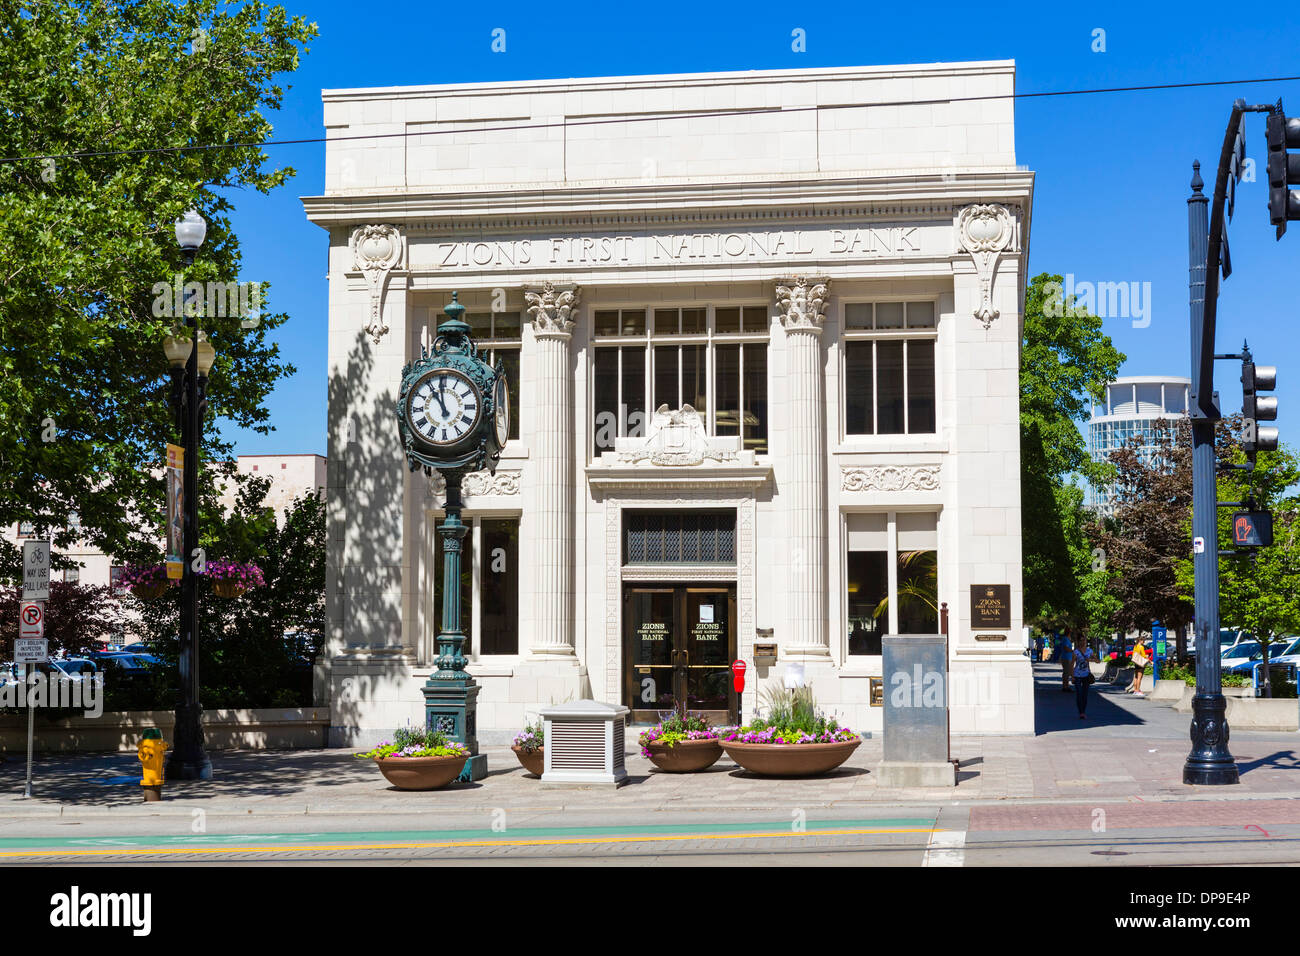 Zions First National Bank branch on Main Street in downtown Salt Lake City, Utah, USA Stock Photo